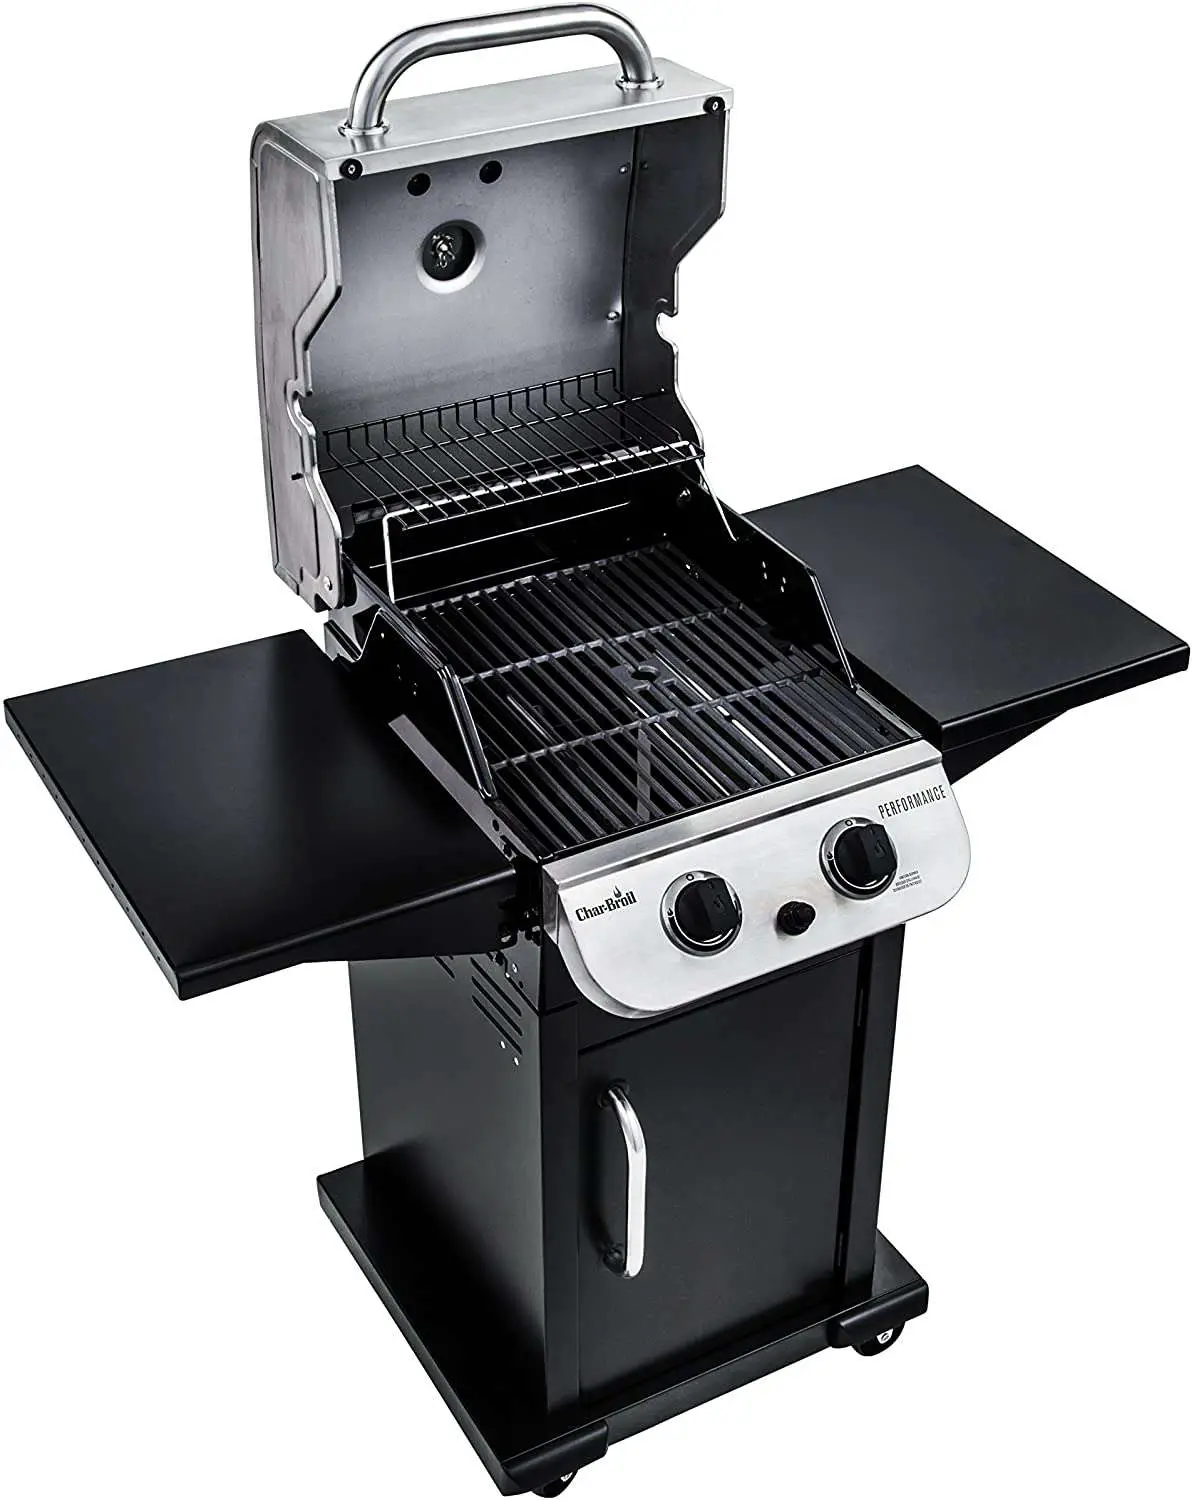 Top 10 Best Gas Grill Under 300$ (Buying Guide & Review ...